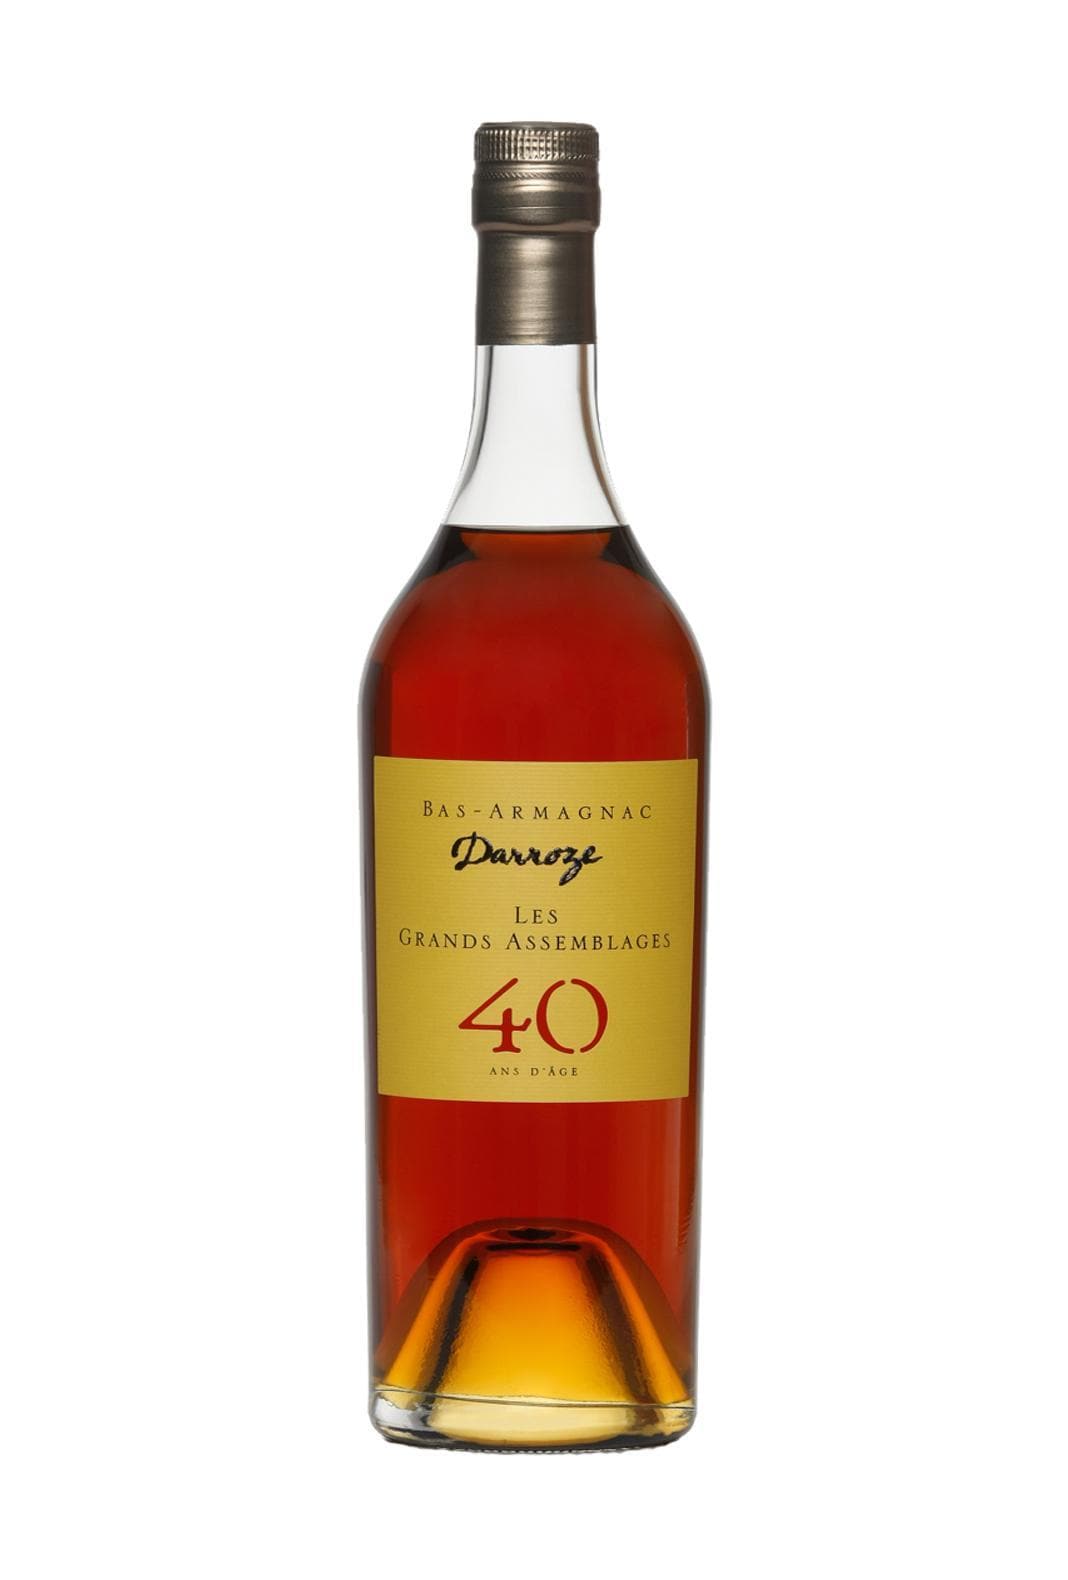 Darroze Grand Bas Armagnac Les Grands Assemblages 40 years 43% 700ml | Brandy | Shop online at Spirits of France